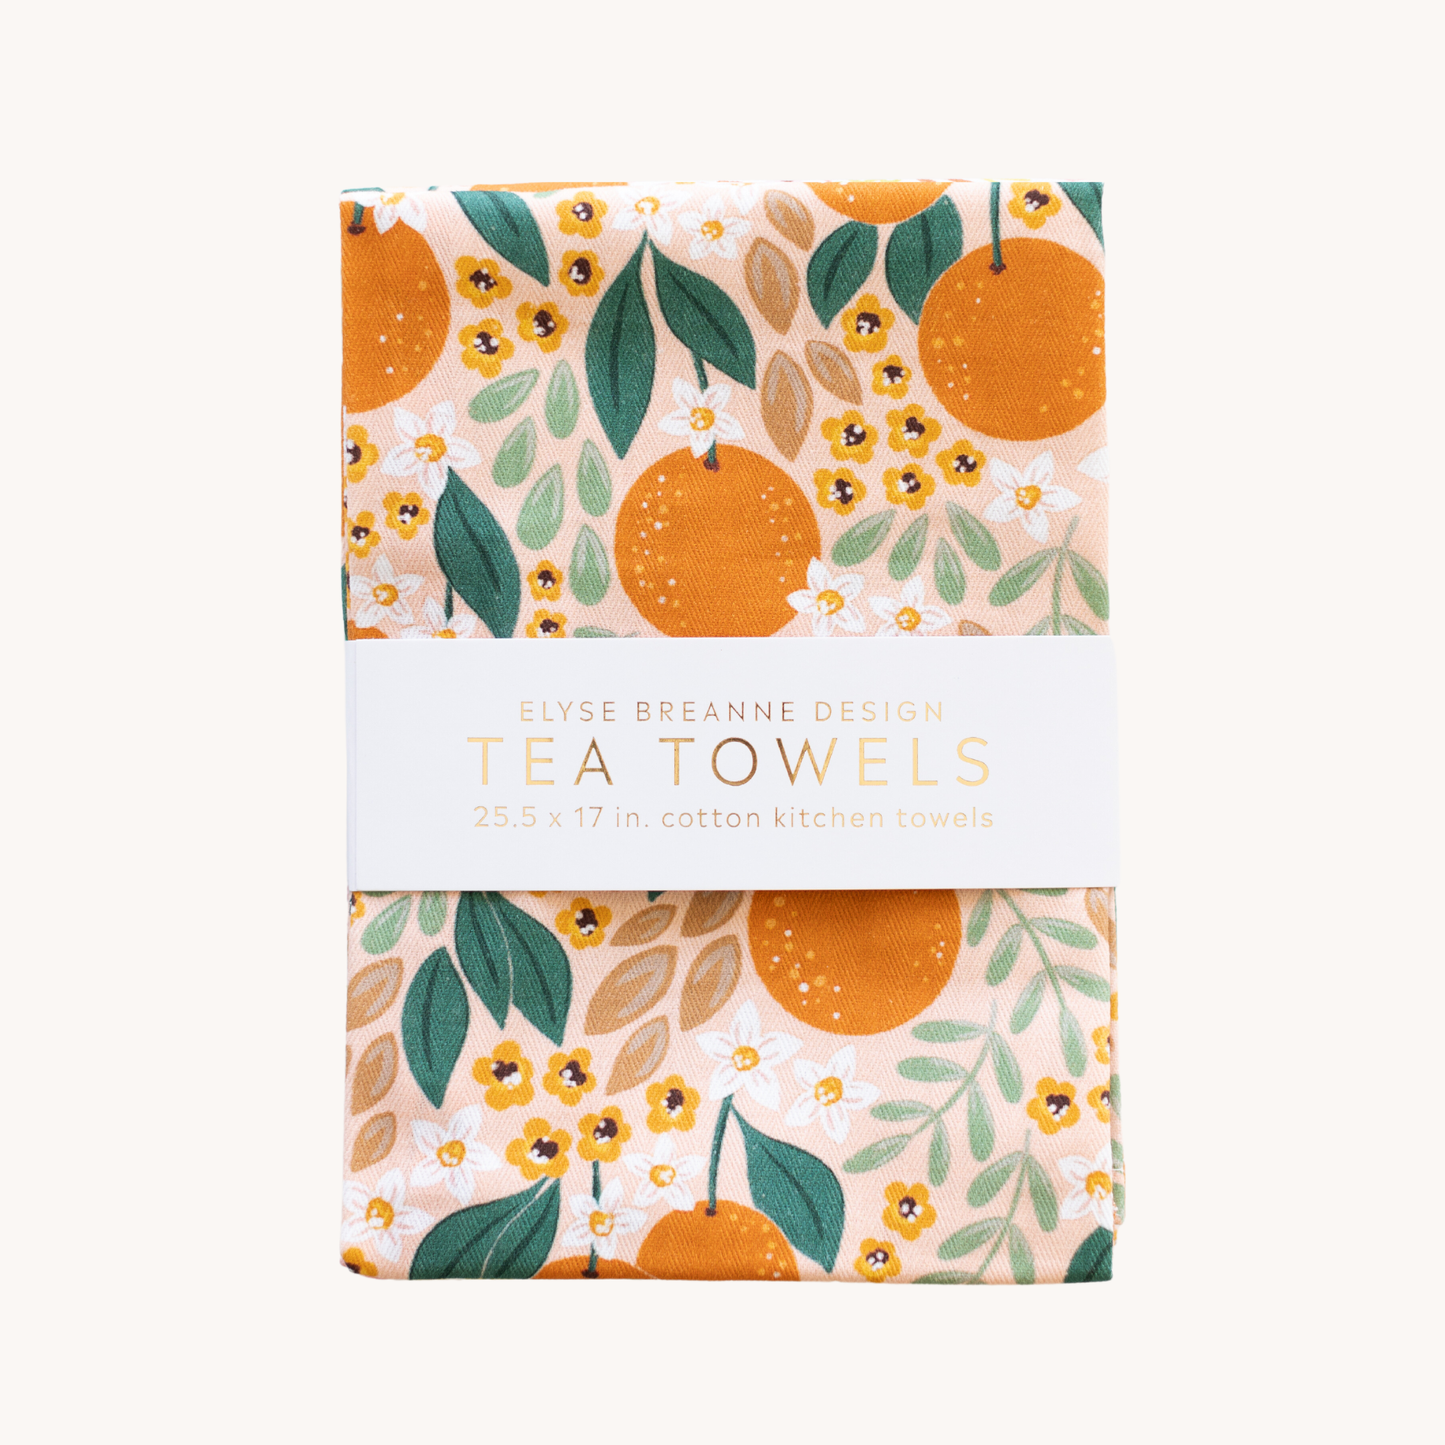 Orange floral tea towel with a band that reads "Elyse Breanne Design"